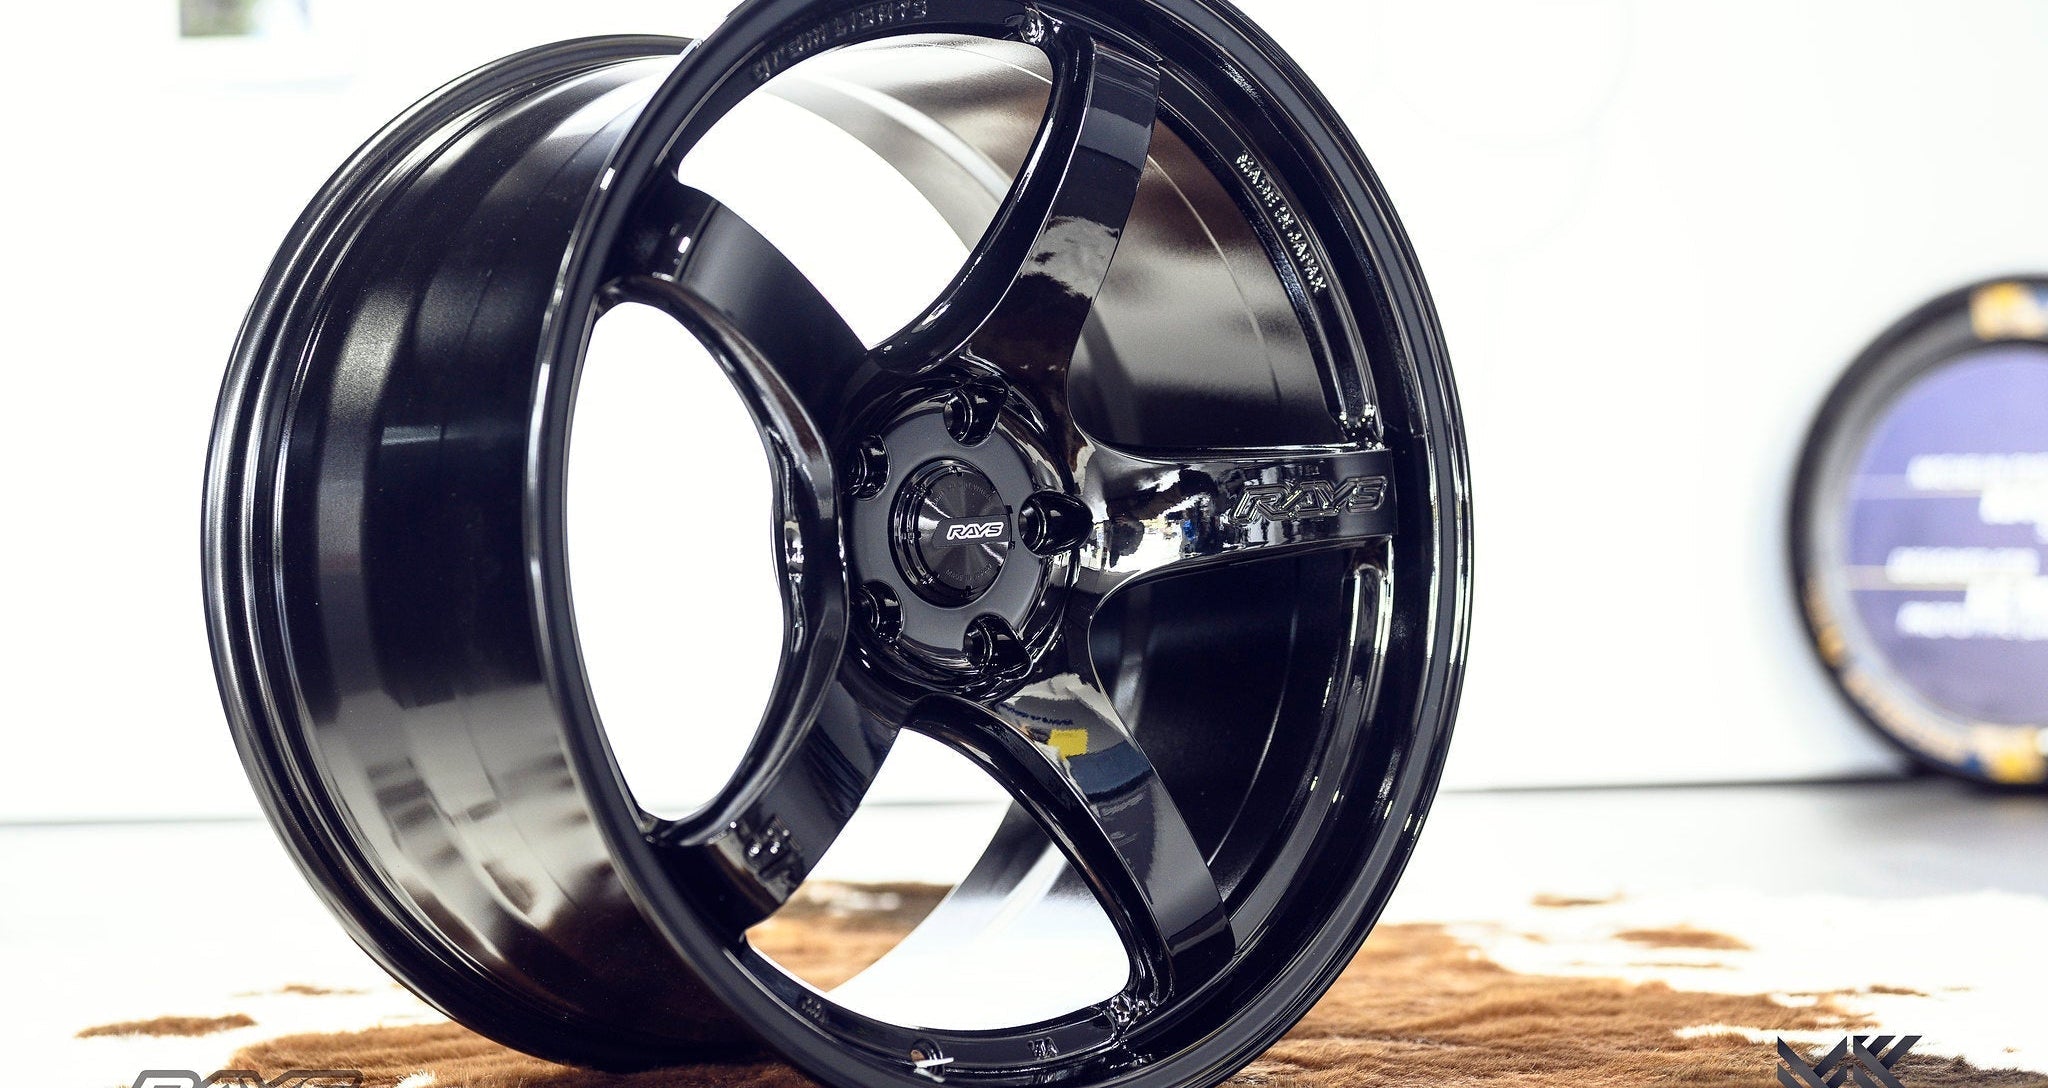 gramLIGHTS 57CR 18" Single Units - Premium Wheels from Gram Lights - From just $623.0! Shop now at MK MOTORSPORTS